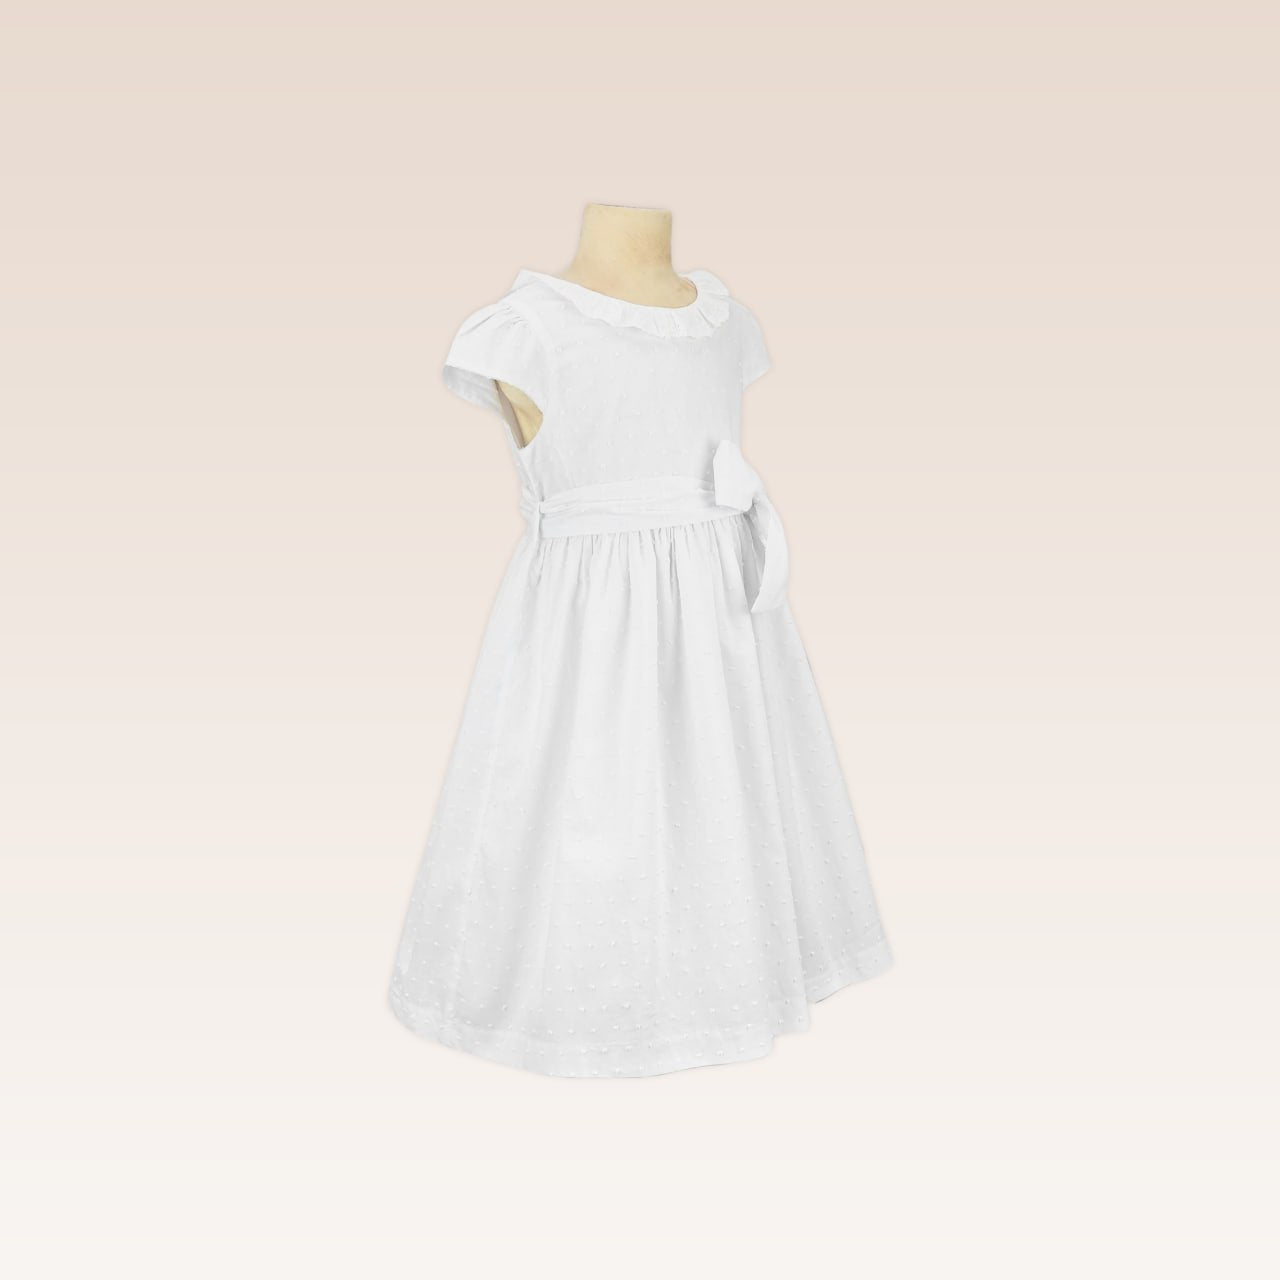 Kiara Girls White Dress with Ruffled Neck and Bow Belt tie Front